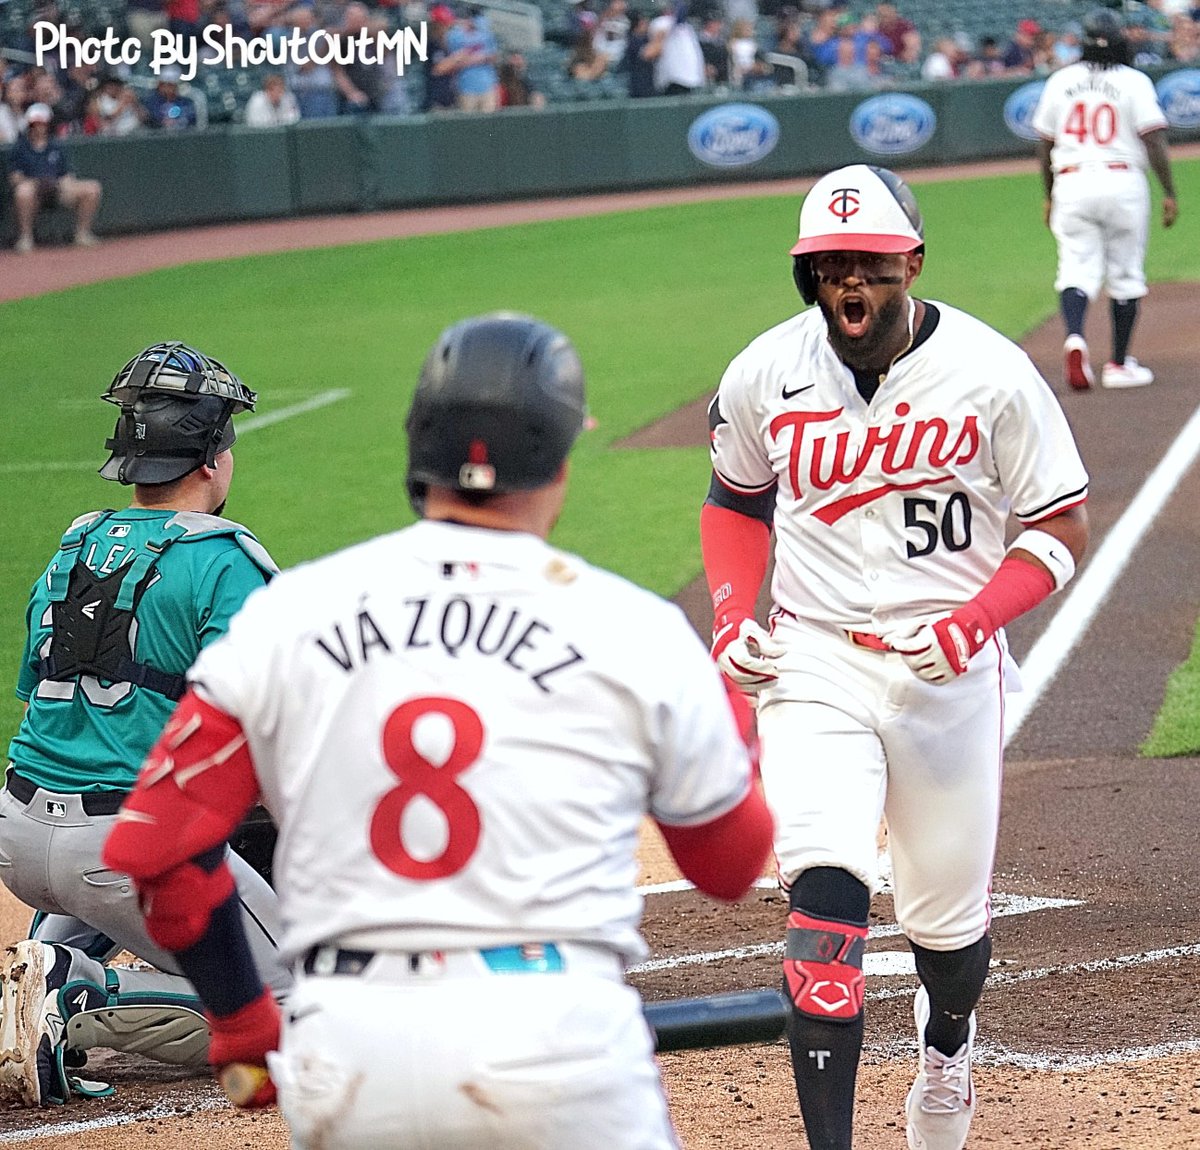 The Twins continue to win. They took 3 out of 4 from Seattle and have won 15 of their last 17 games making them the hottest team in MLB. Here is the Shout Out Minnesota Sports recap of the Twins vs Mariners series. 
Shoutoutmn.com/minnesota-twins 
📸 Shout Out Minnesota Sports